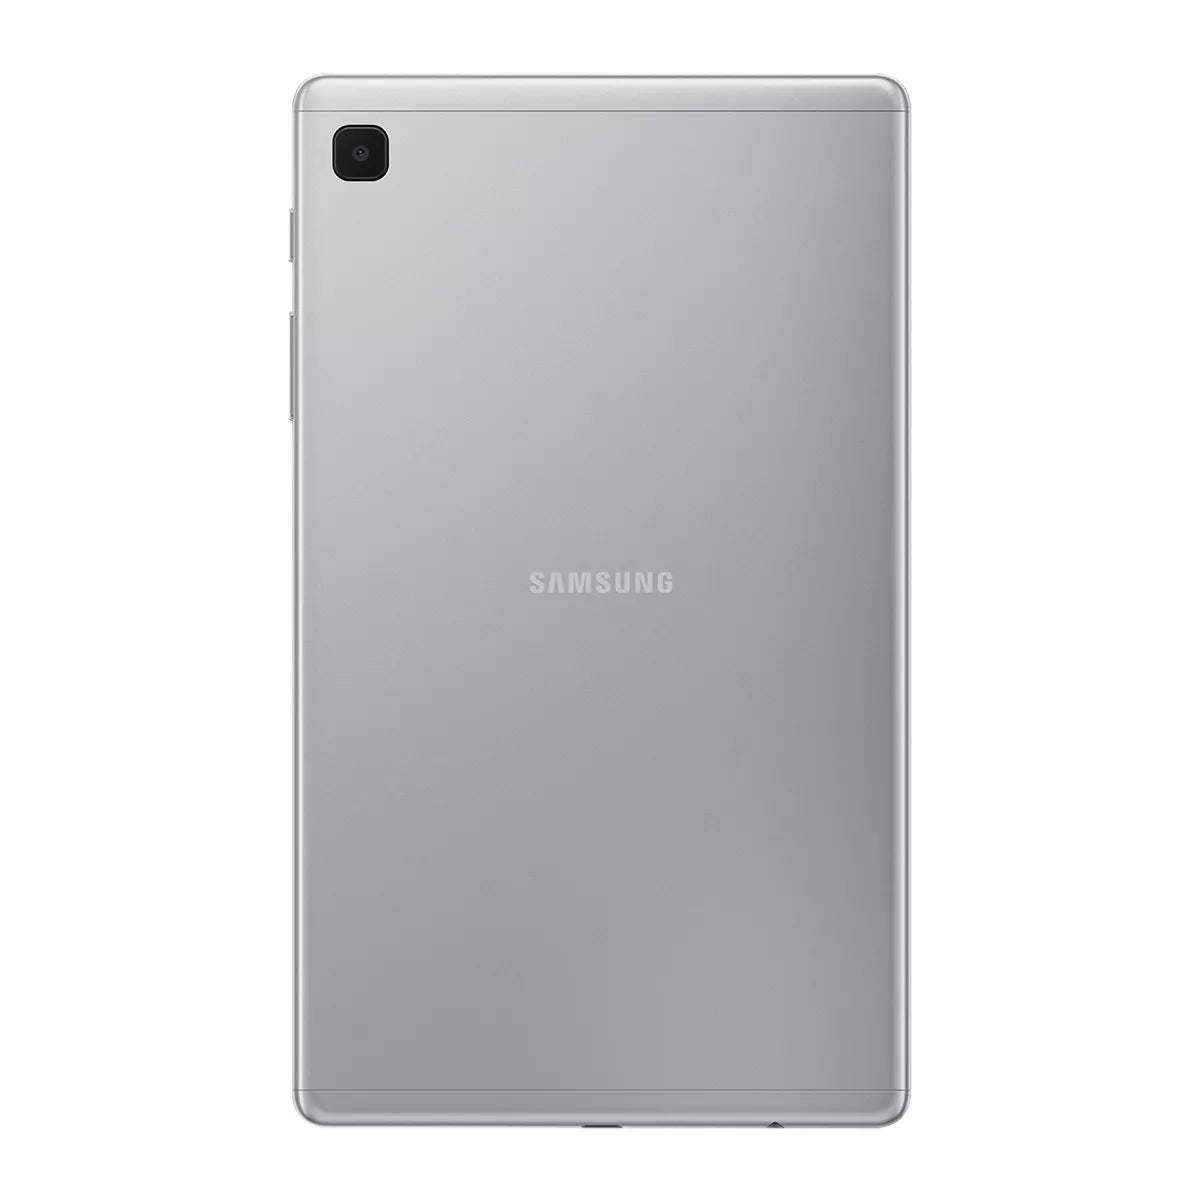 Samsung Galaxy Tab A7 | Mobile & Tablet | Electronic | Beast Tablet in Bahrain | Halabh.com